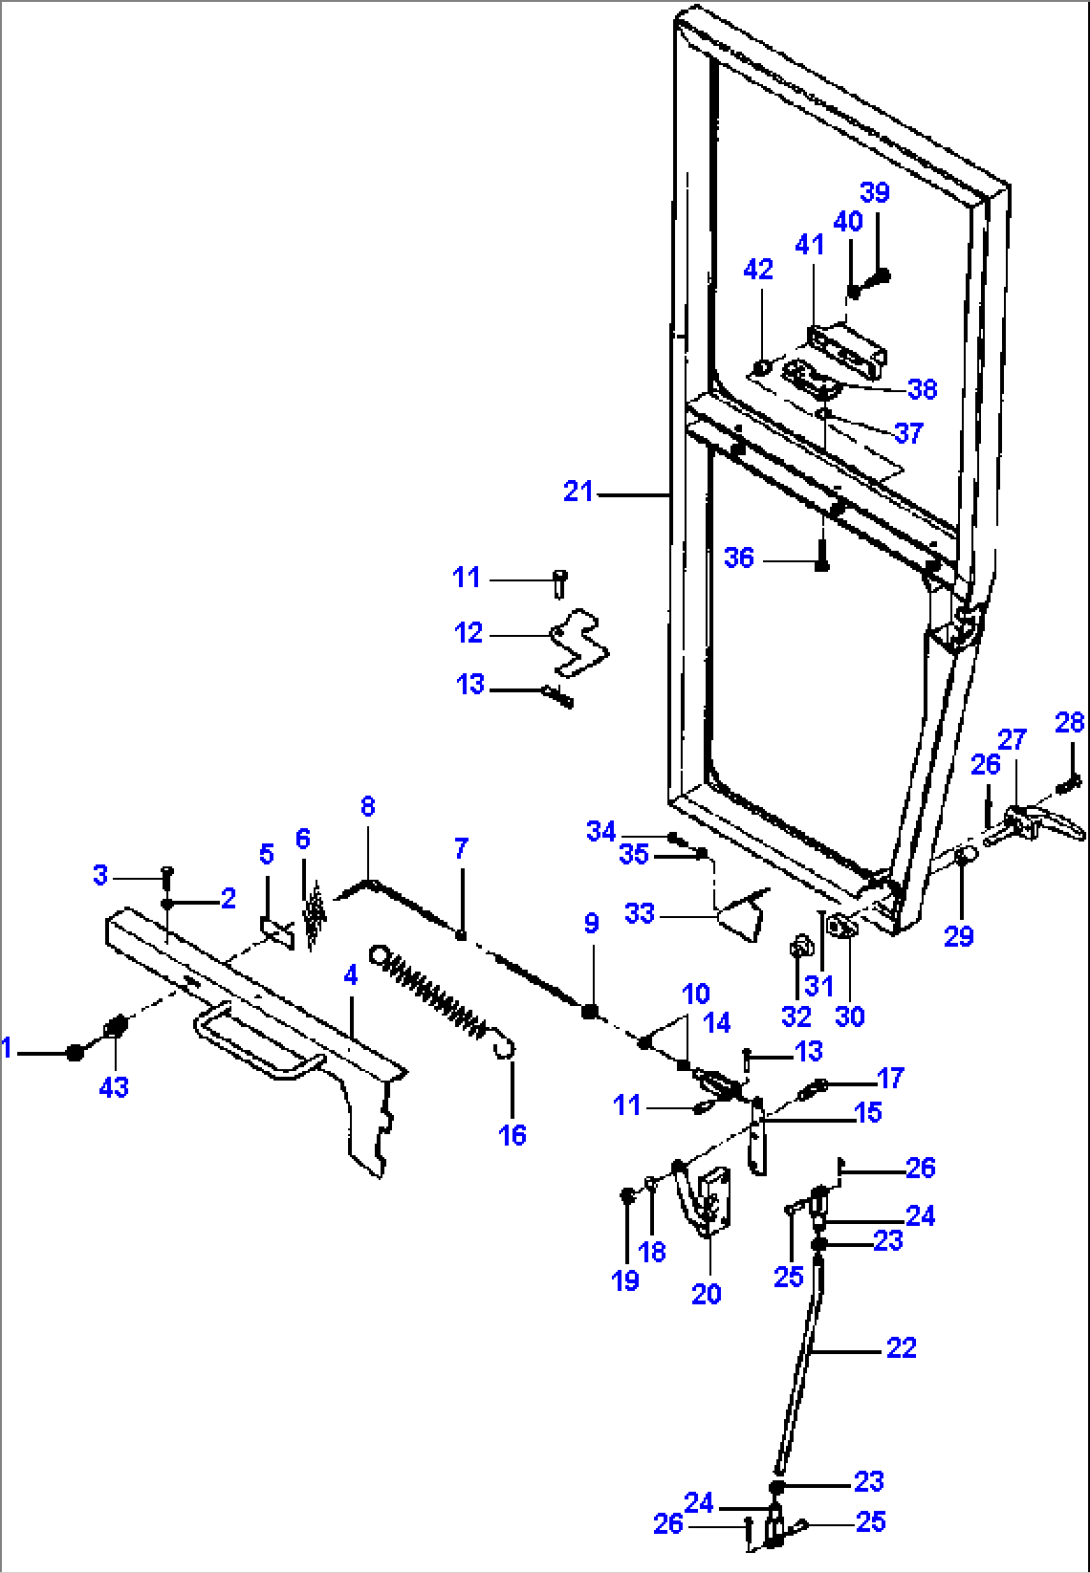 FULL-HEIGHT CAB - L.H. DOOR S/N 202970 AND UP